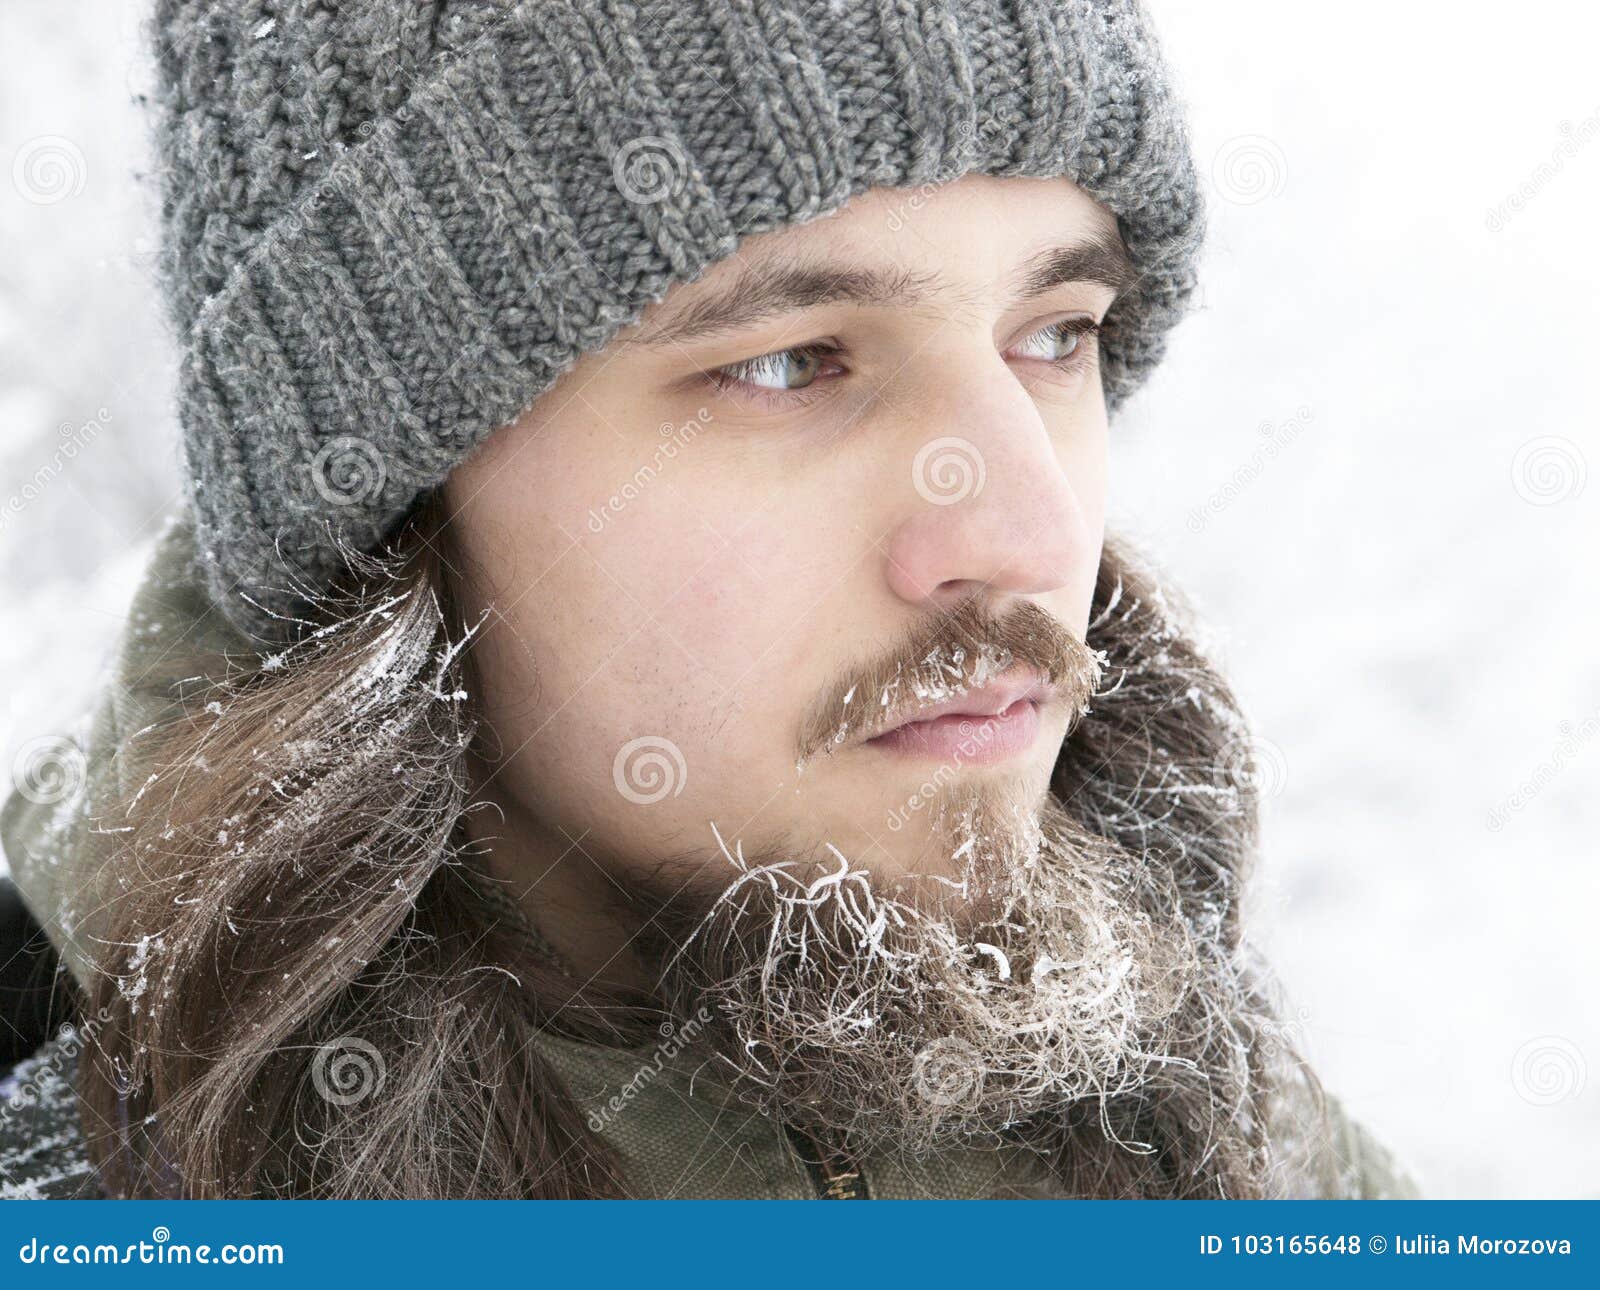 A Man in a Grey Knitted Hat, with Frosted Beard and Long Hair in Winter.  Stock Photo - Image of daytime, icing: 103165648